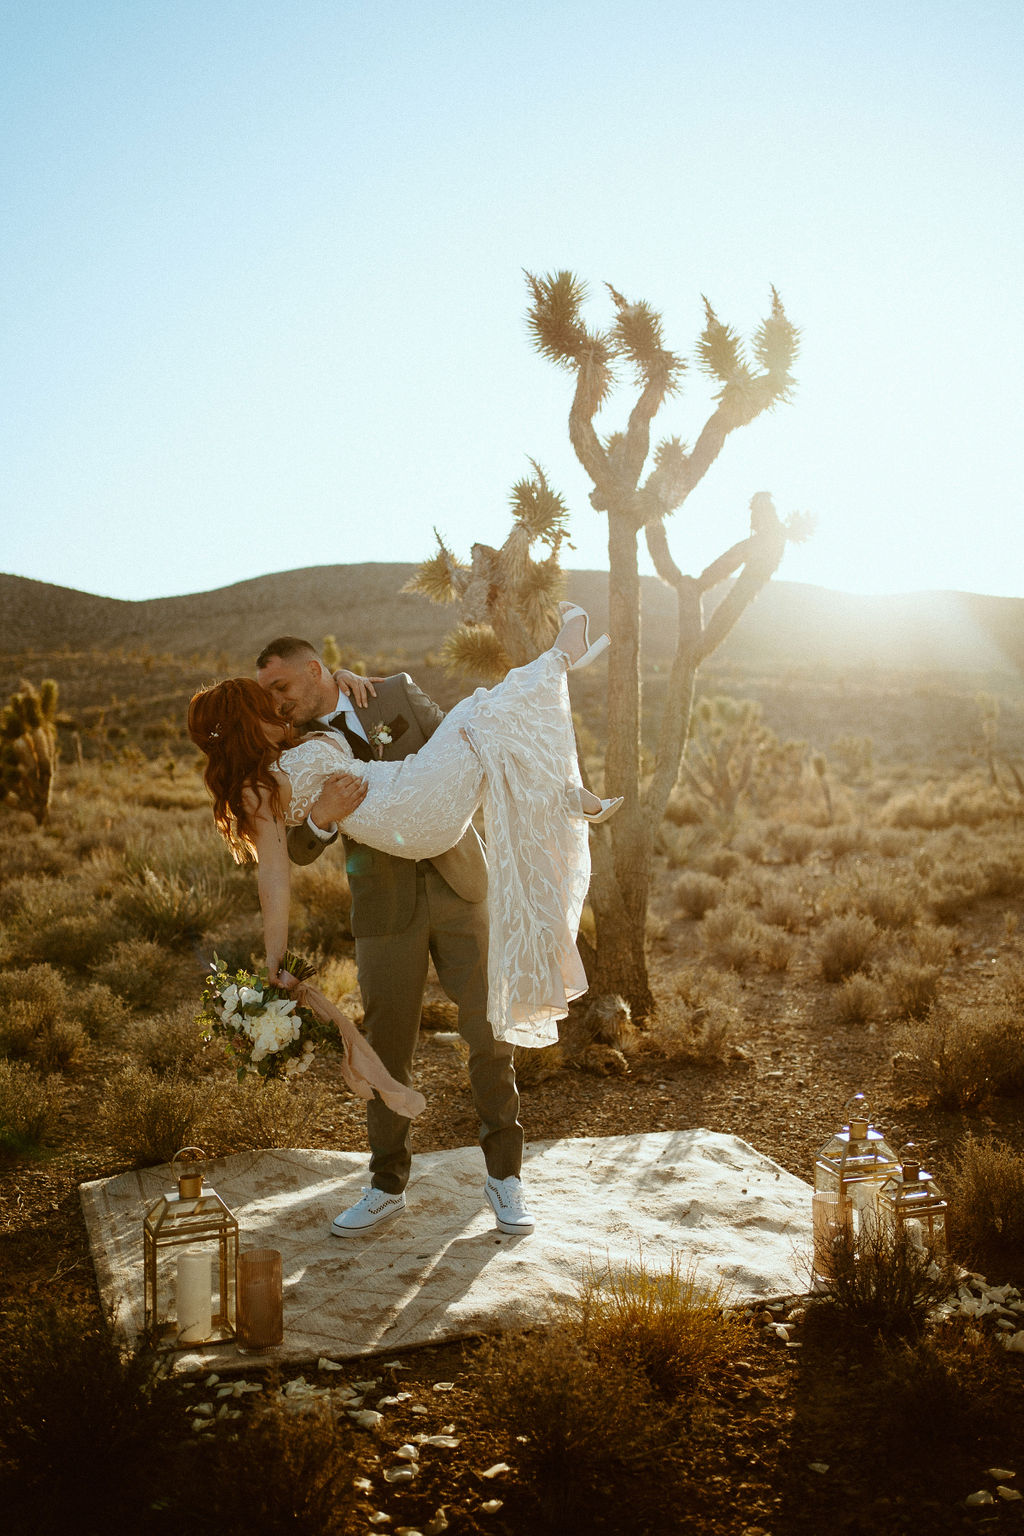 Husband holding wife at ceremony location during Sunset during their Kyle Canyon Timeless Desert Elopement